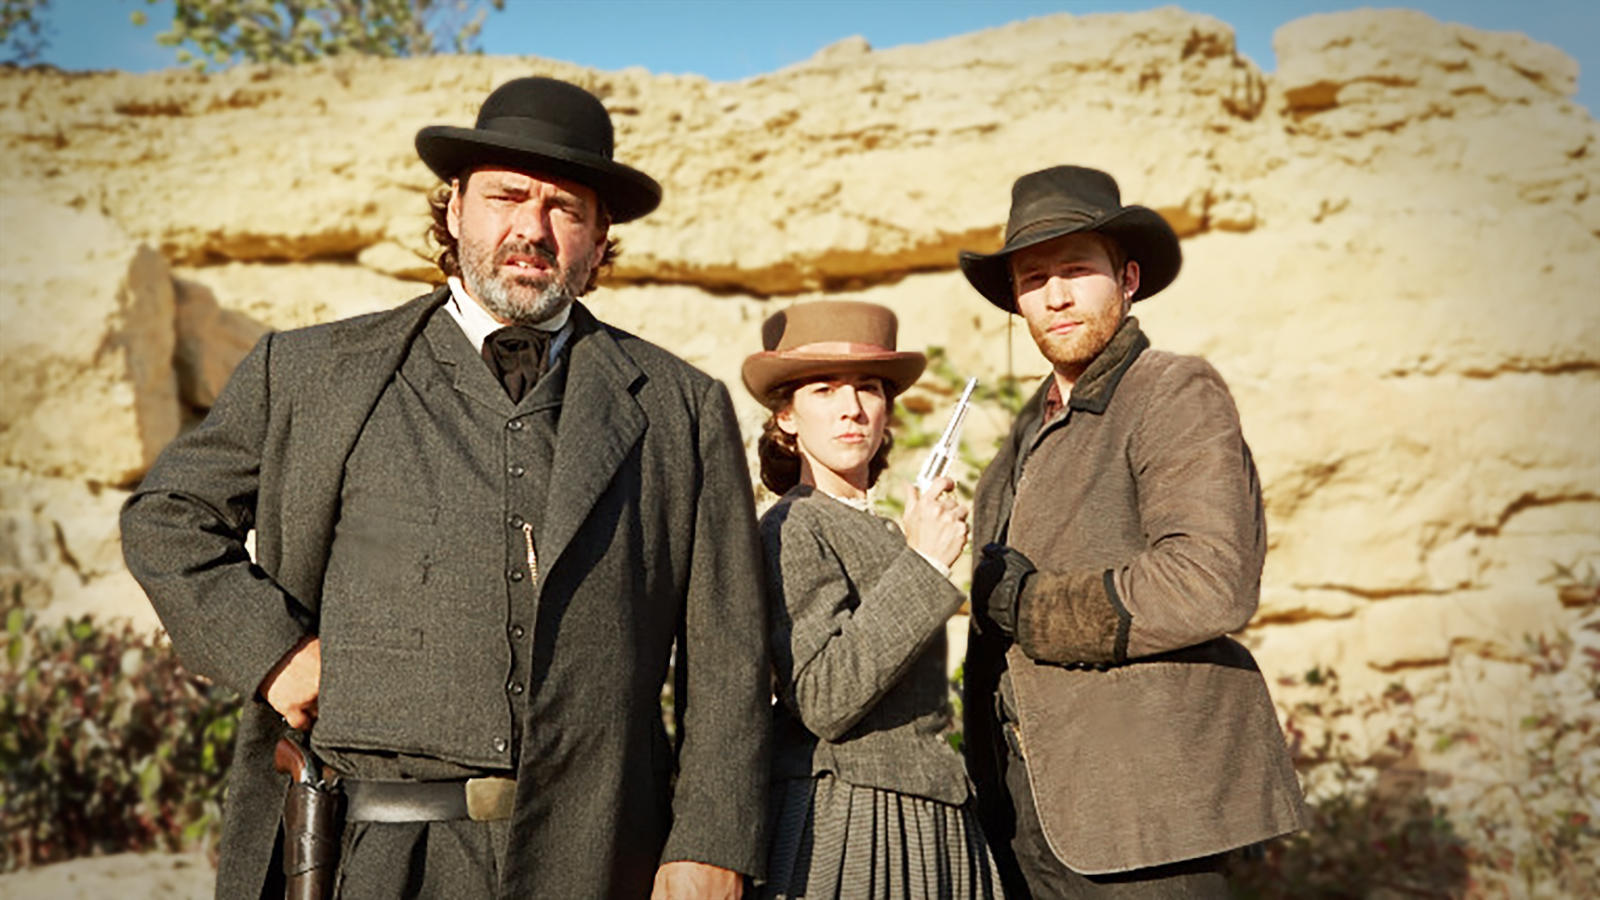 Jesse James Facts - The Pinkertons are a real detective agency. Founded by Allan Pinkerton, as personal security during the civil war, he hired